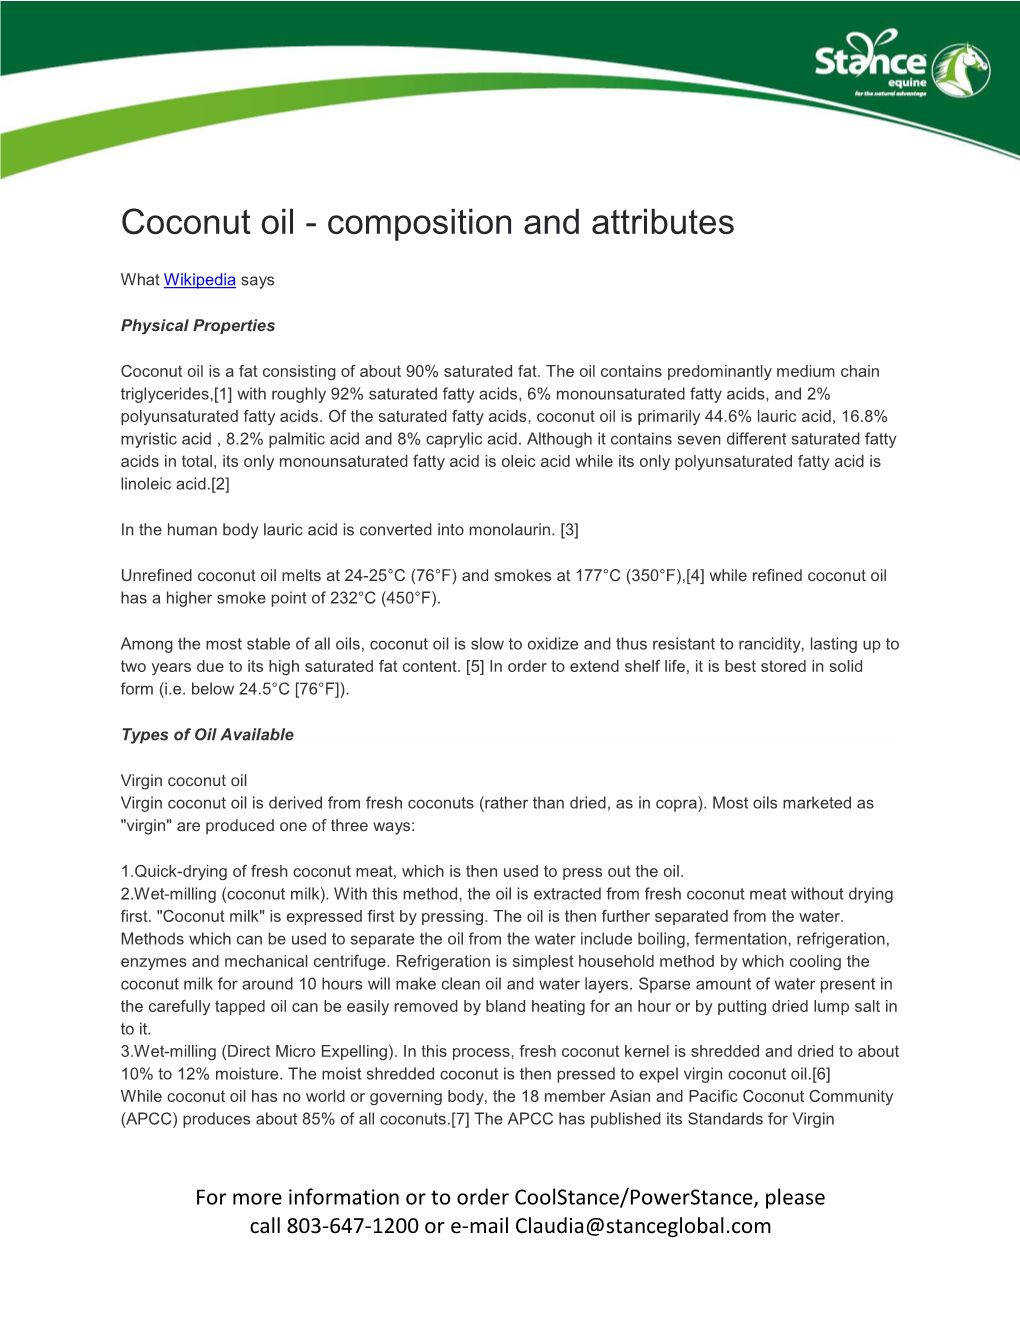 Coconut Oil - Composition and Attributes